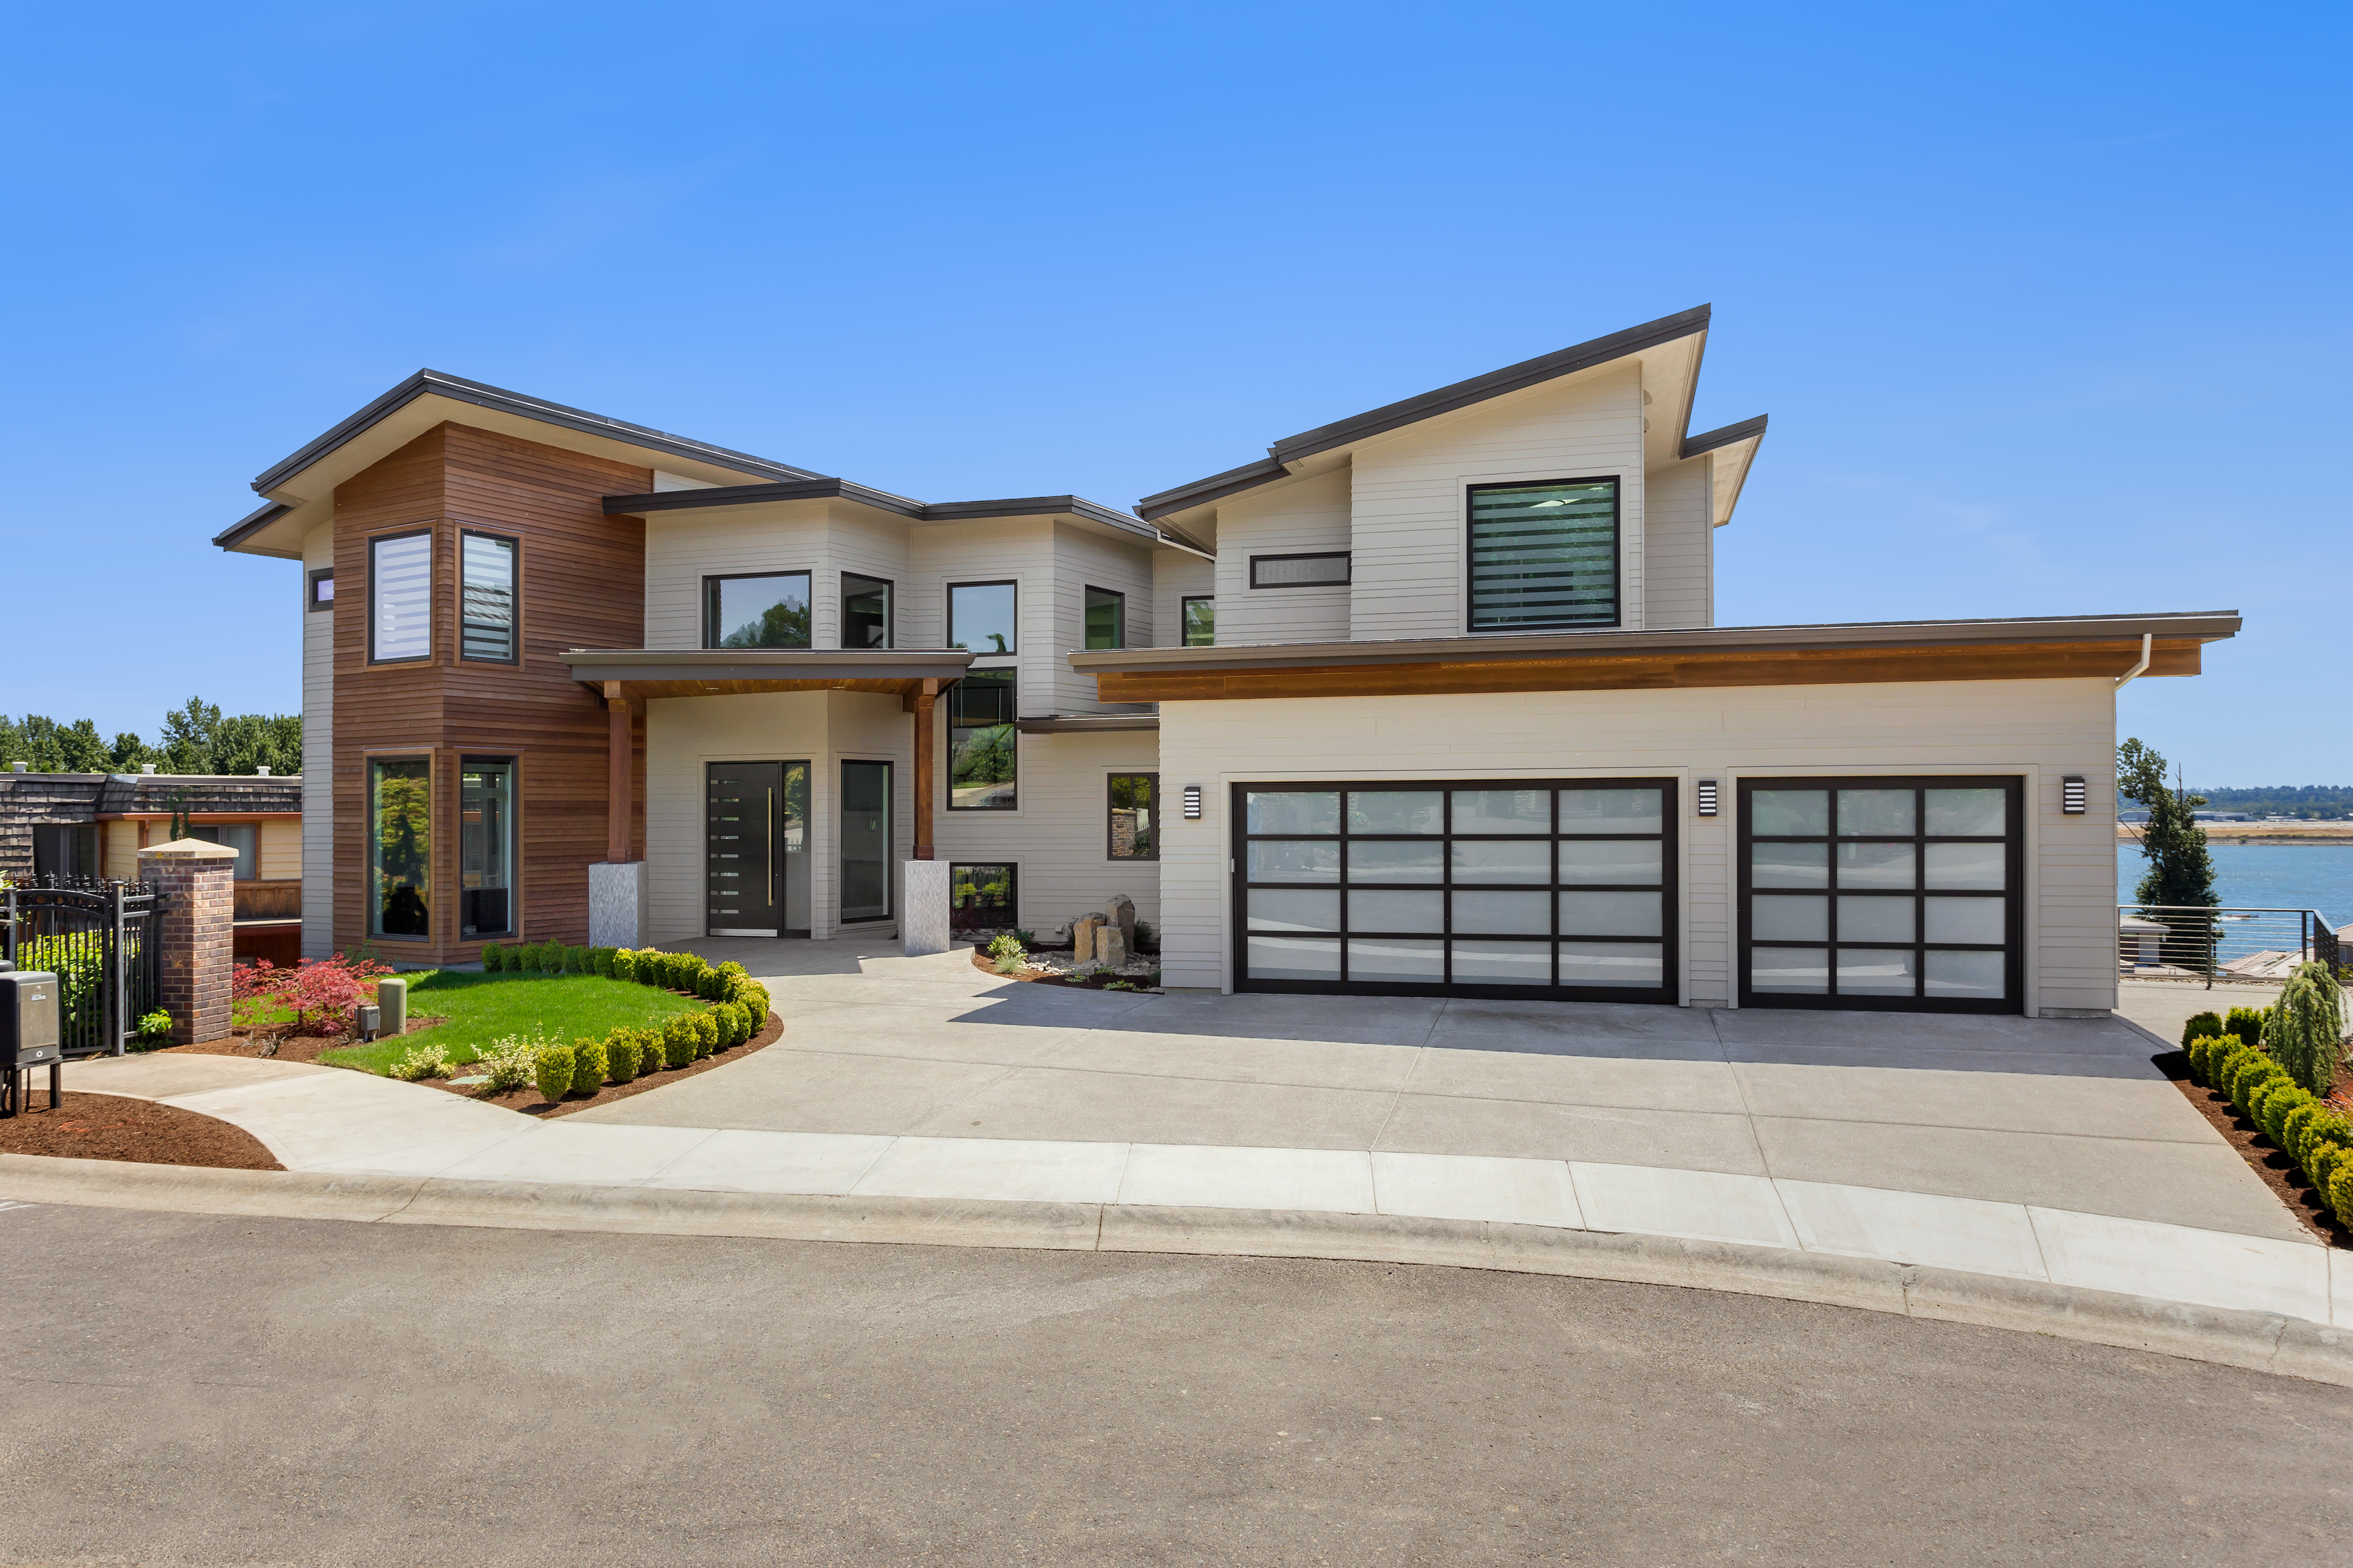 Beautiful Contemporary Home Exterior on Sunny Day. | Source: Shutterstock